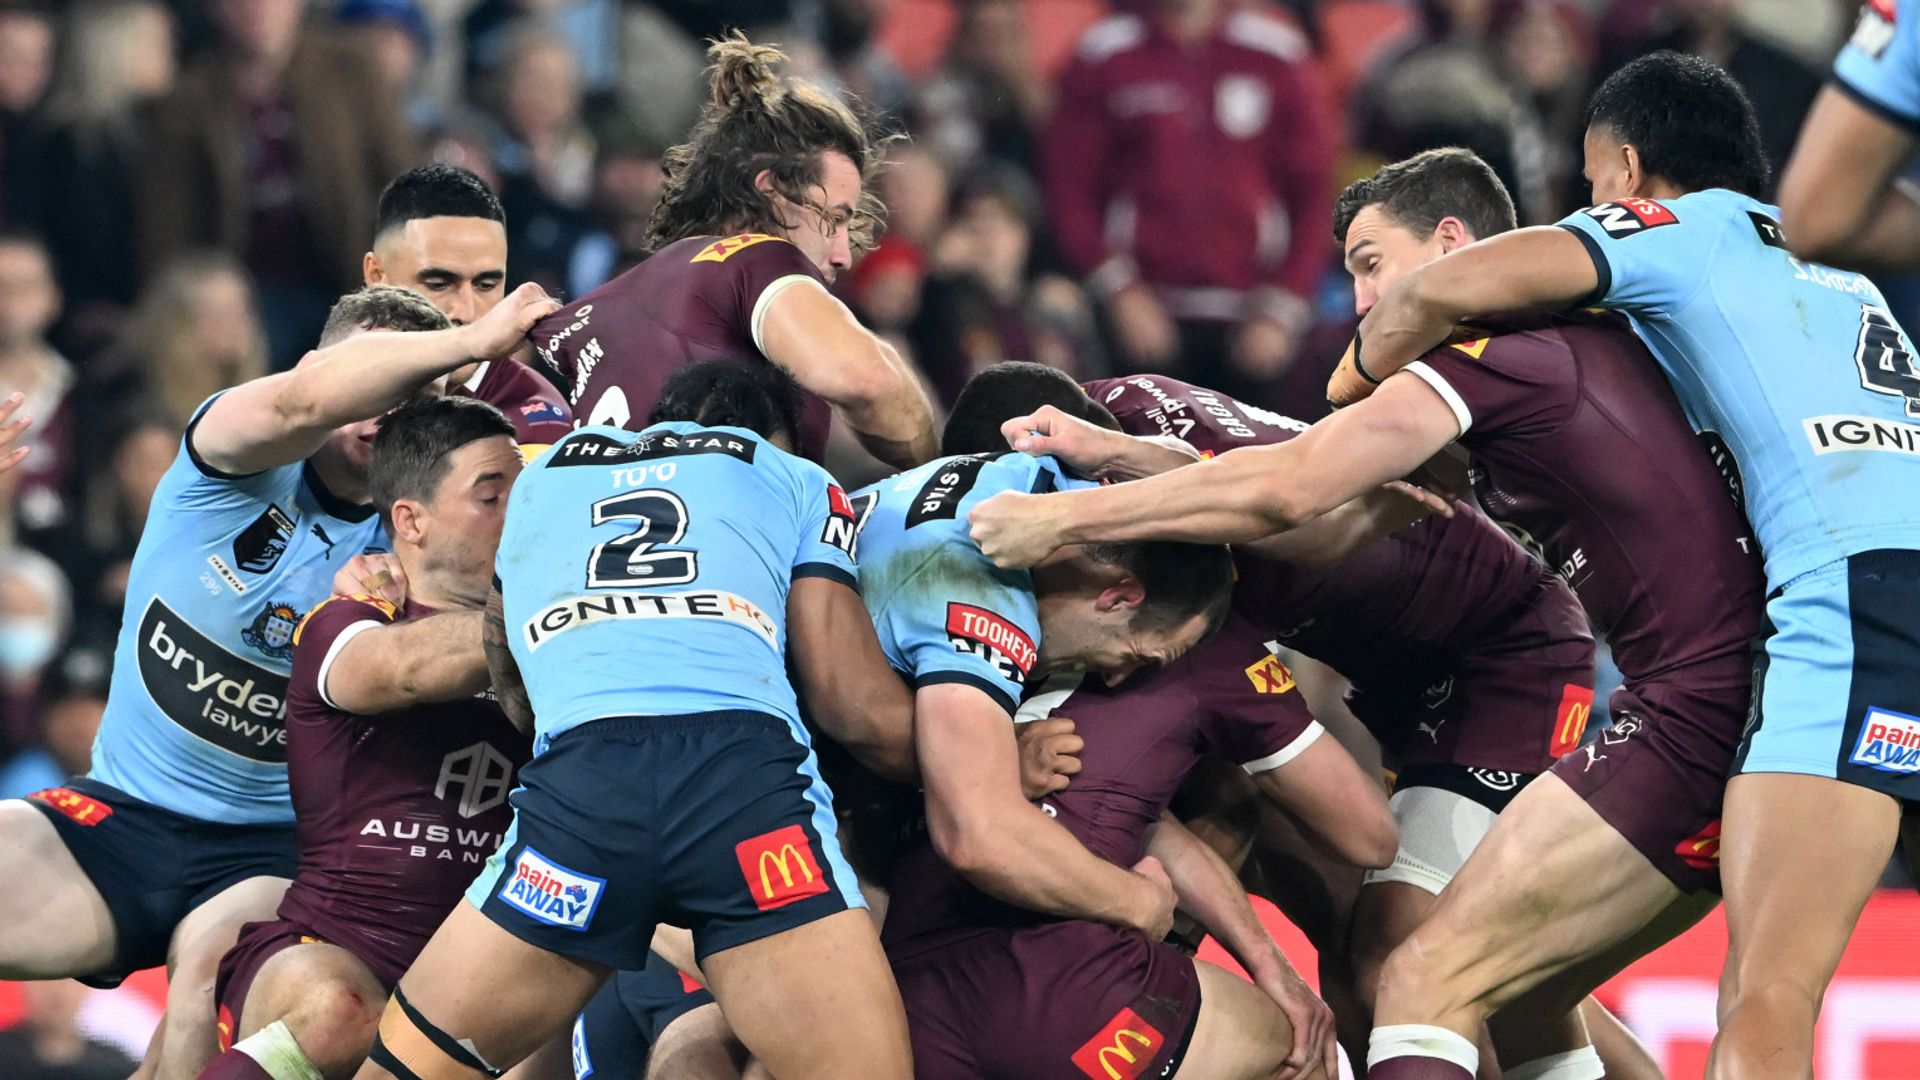 State of Origin II: Queensland vs New South Wales LIVE!